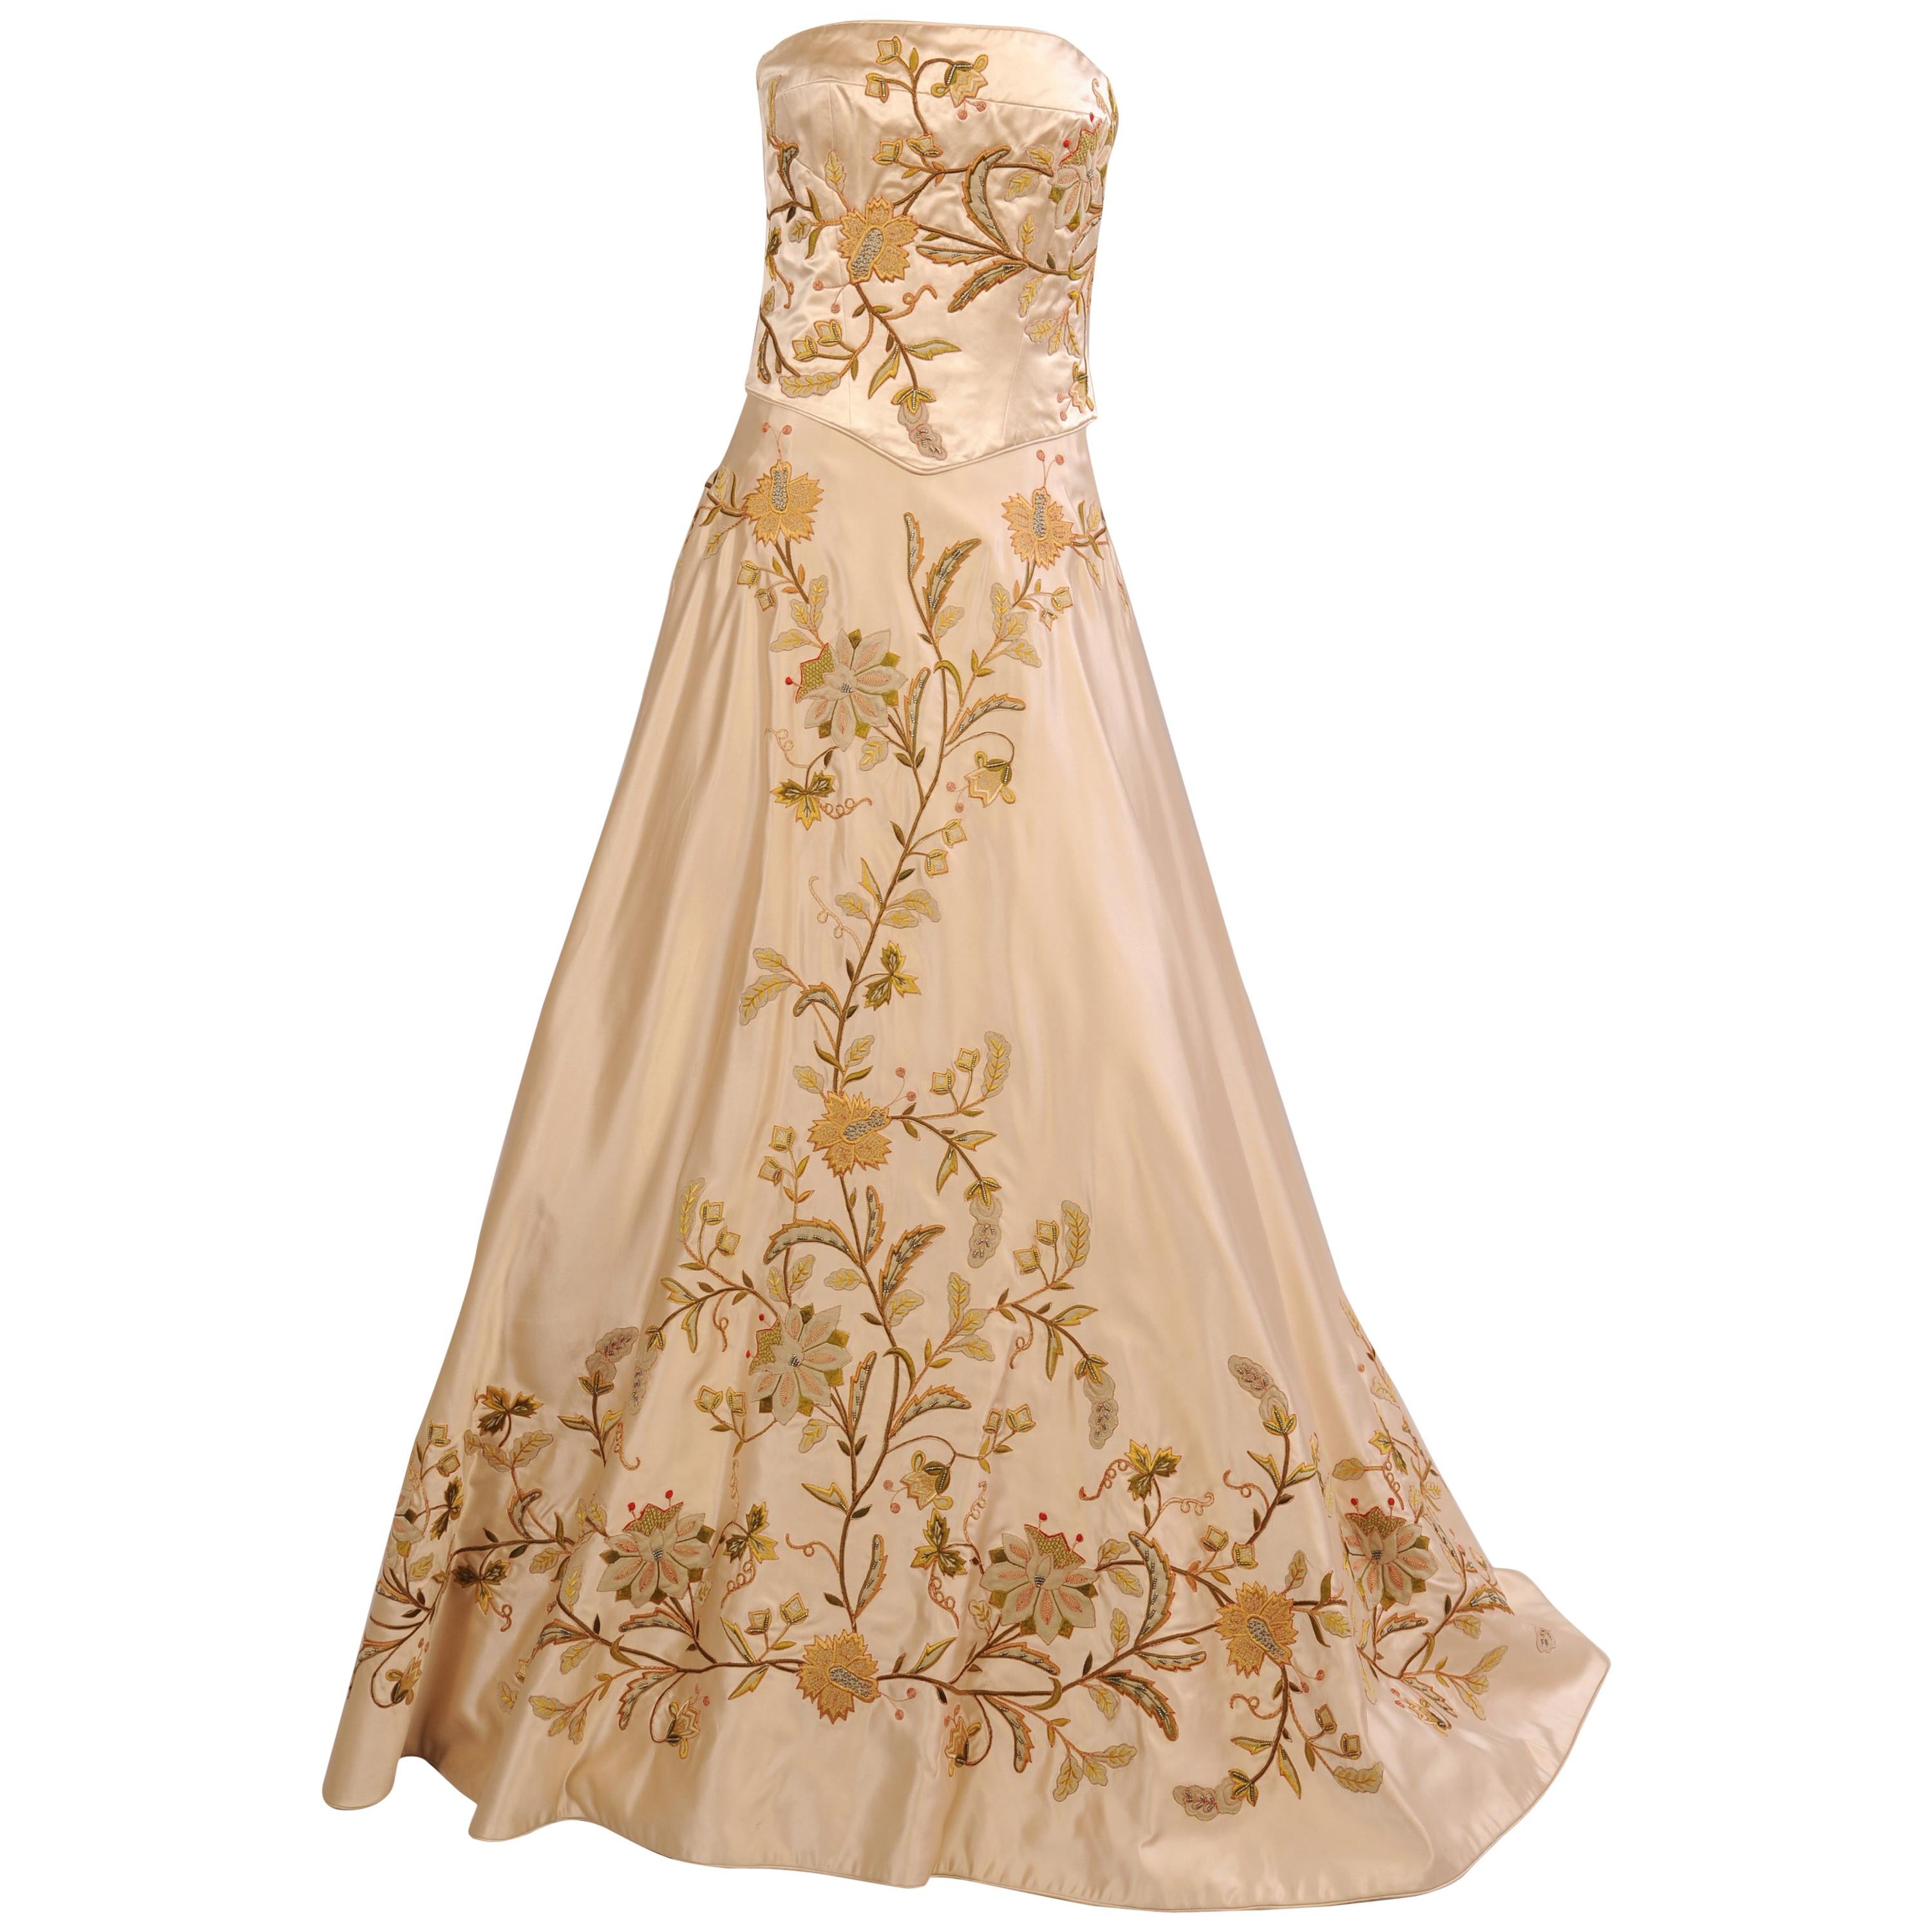 Eavis & Brown Beaded Embroidered and Appliqued Cream Silk Satin Two Piece Gown